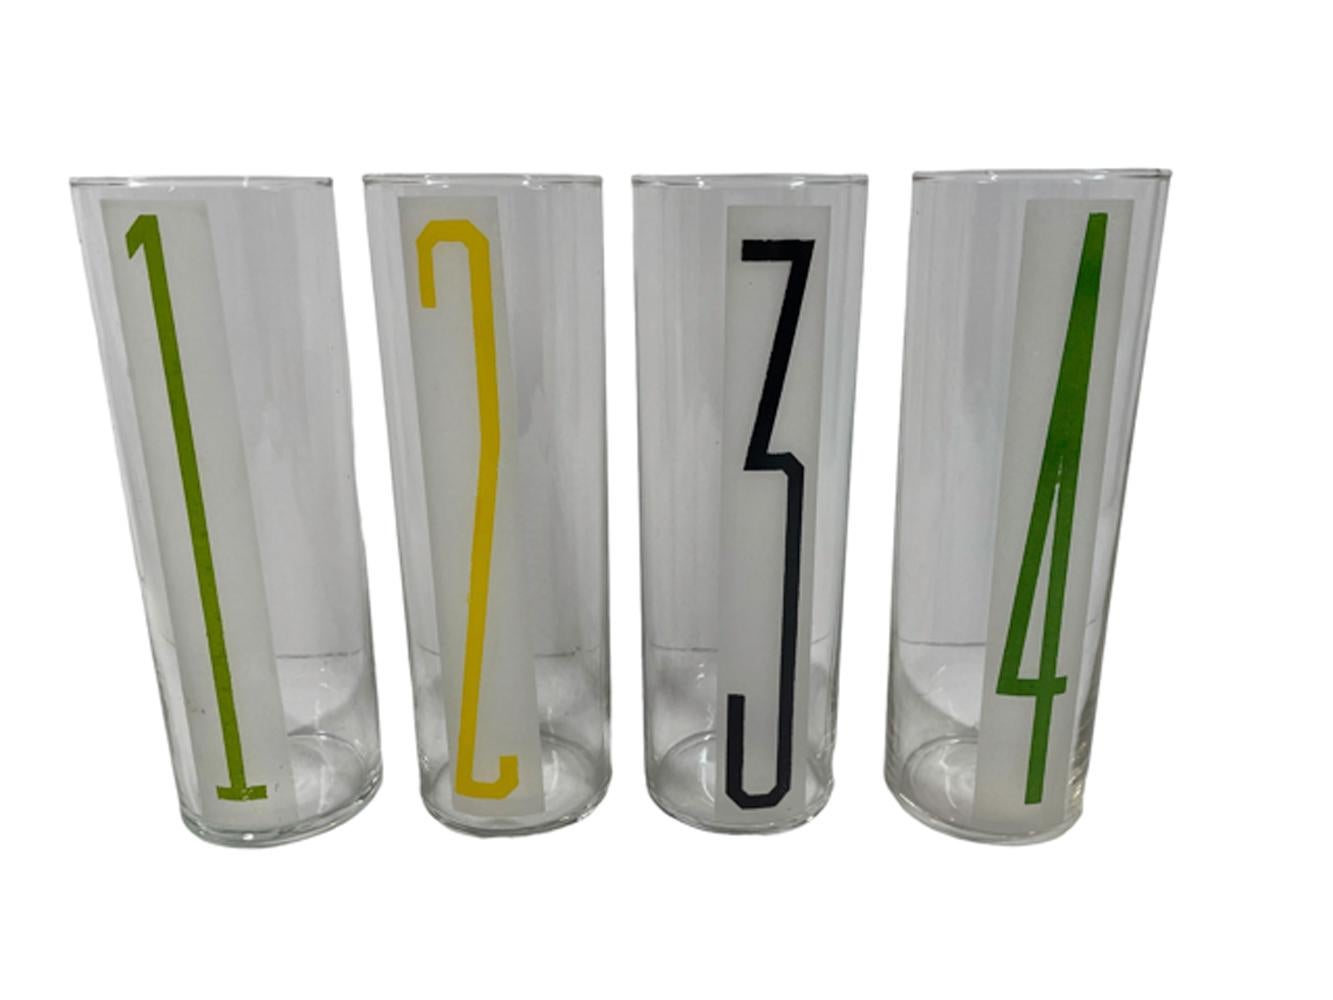 Set of 8 Libbey Glass Tom Collins glasses in clear glass with a frosted panel, each with a full height numeral in a stylized font and of different colors, 1 through 8.